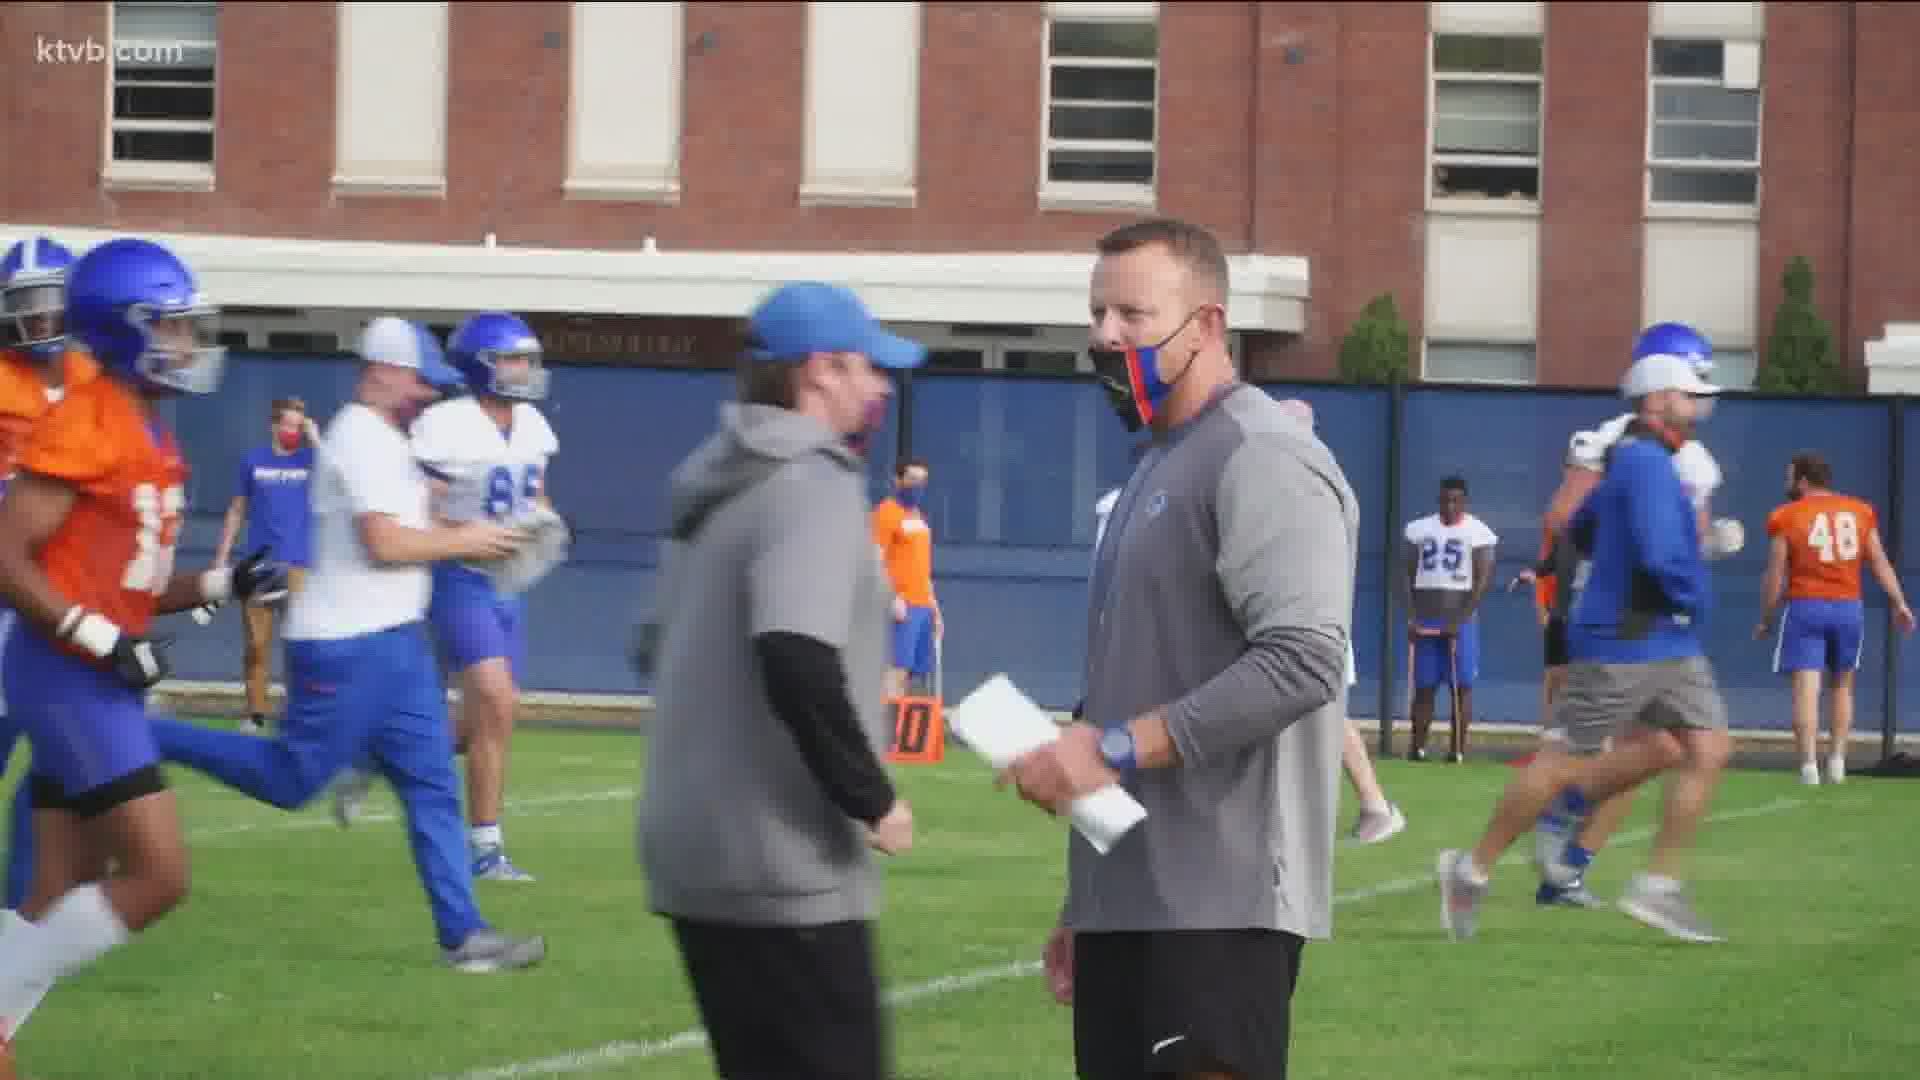 Hear what current Boise State players think of coach Harsin leaving his alma mater.